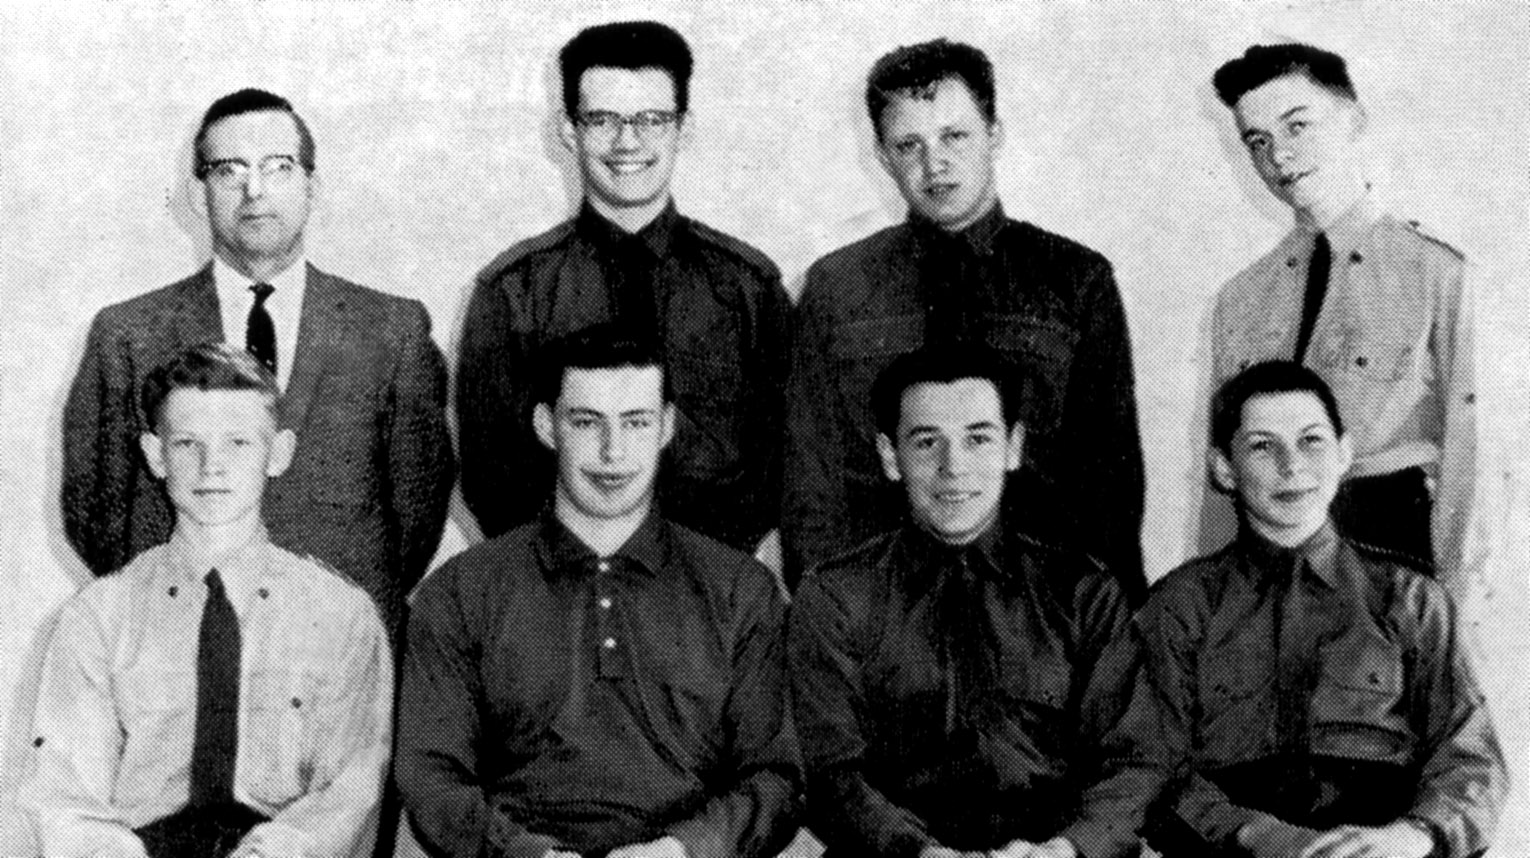 (Click to magnify) FRONT ROW: Barry Timbers, A. Brooks, Dave St.Pierre, R. McGuckin; ***BACK ROW: Mr. Ted Smith, John Armstrong, B. Norton, Bill Leask.